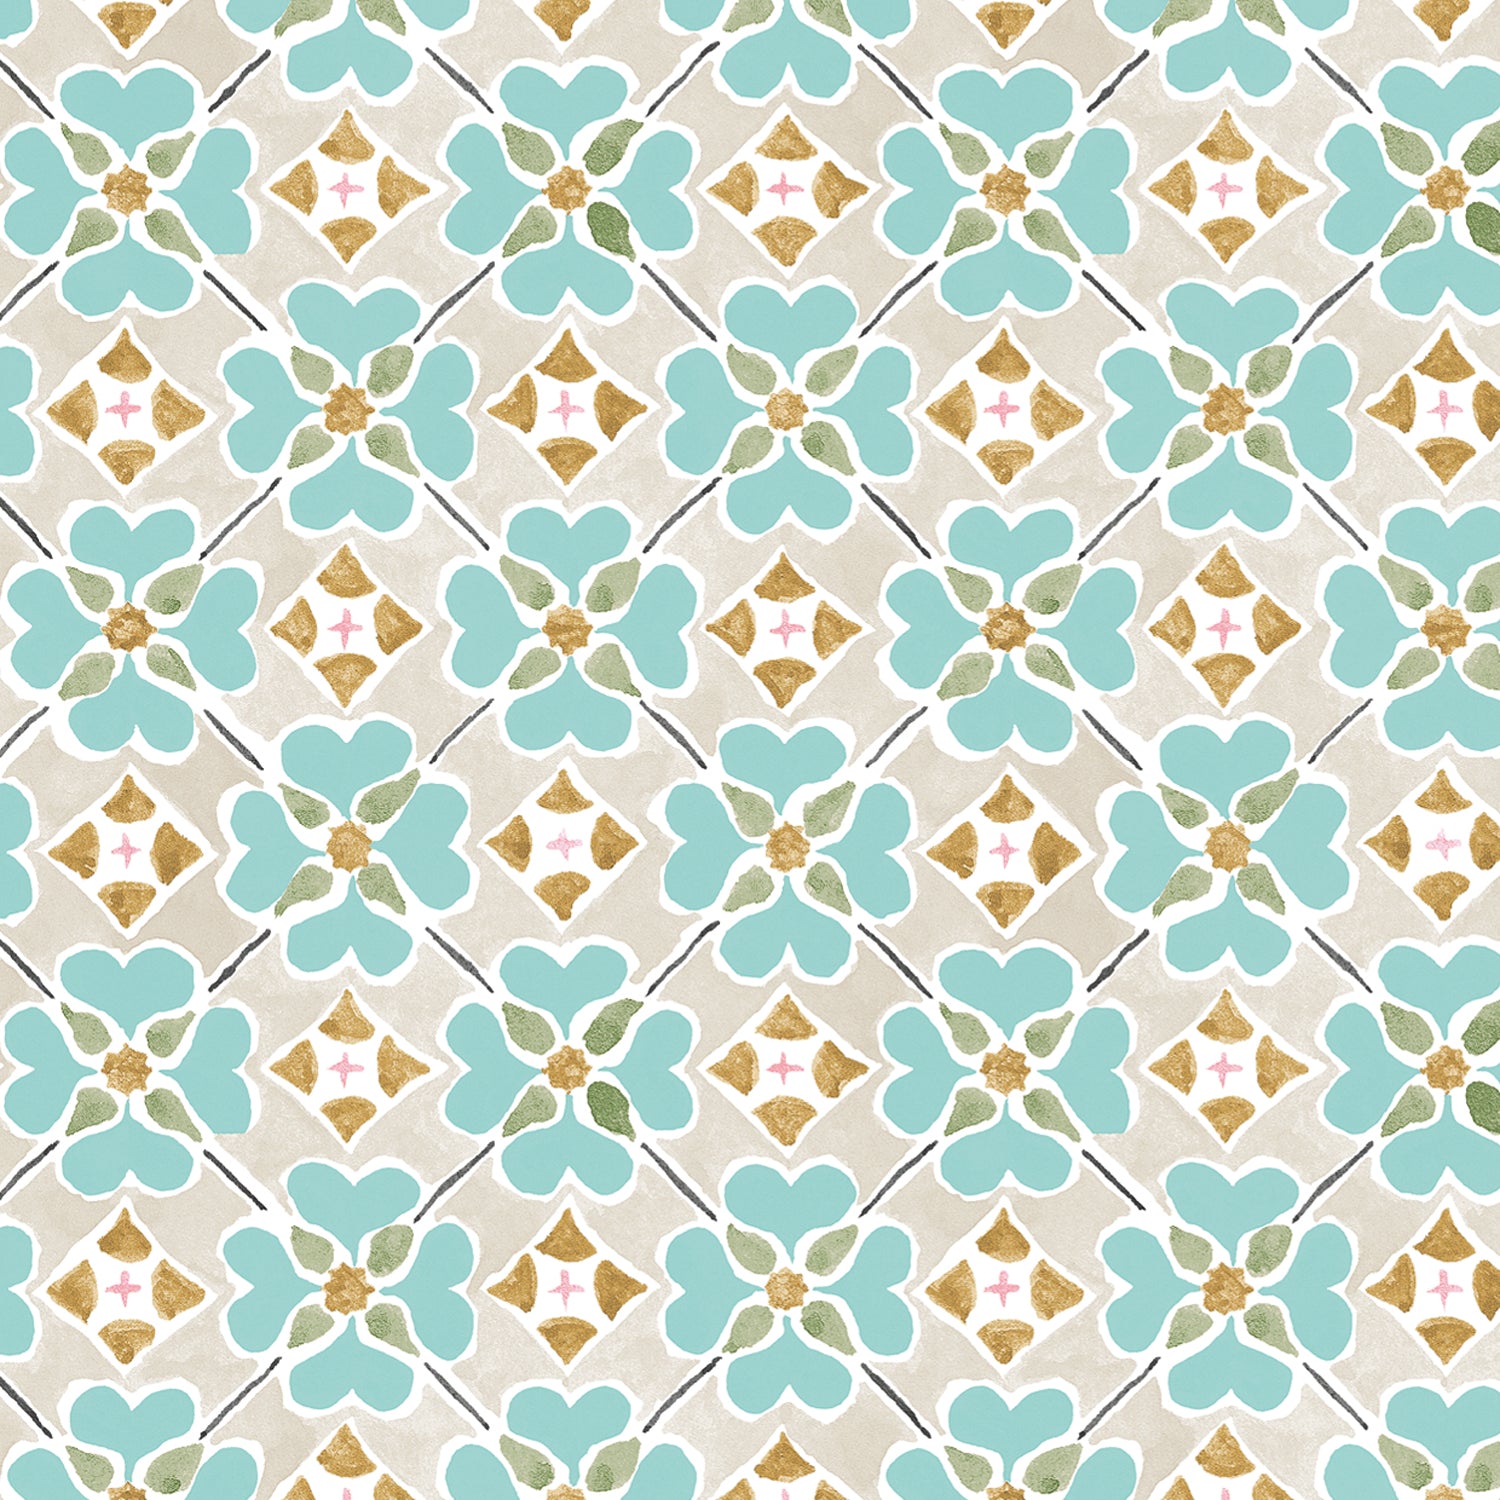 Detail of wallpaper in a floral lattice print in teal, tan, brown and white.